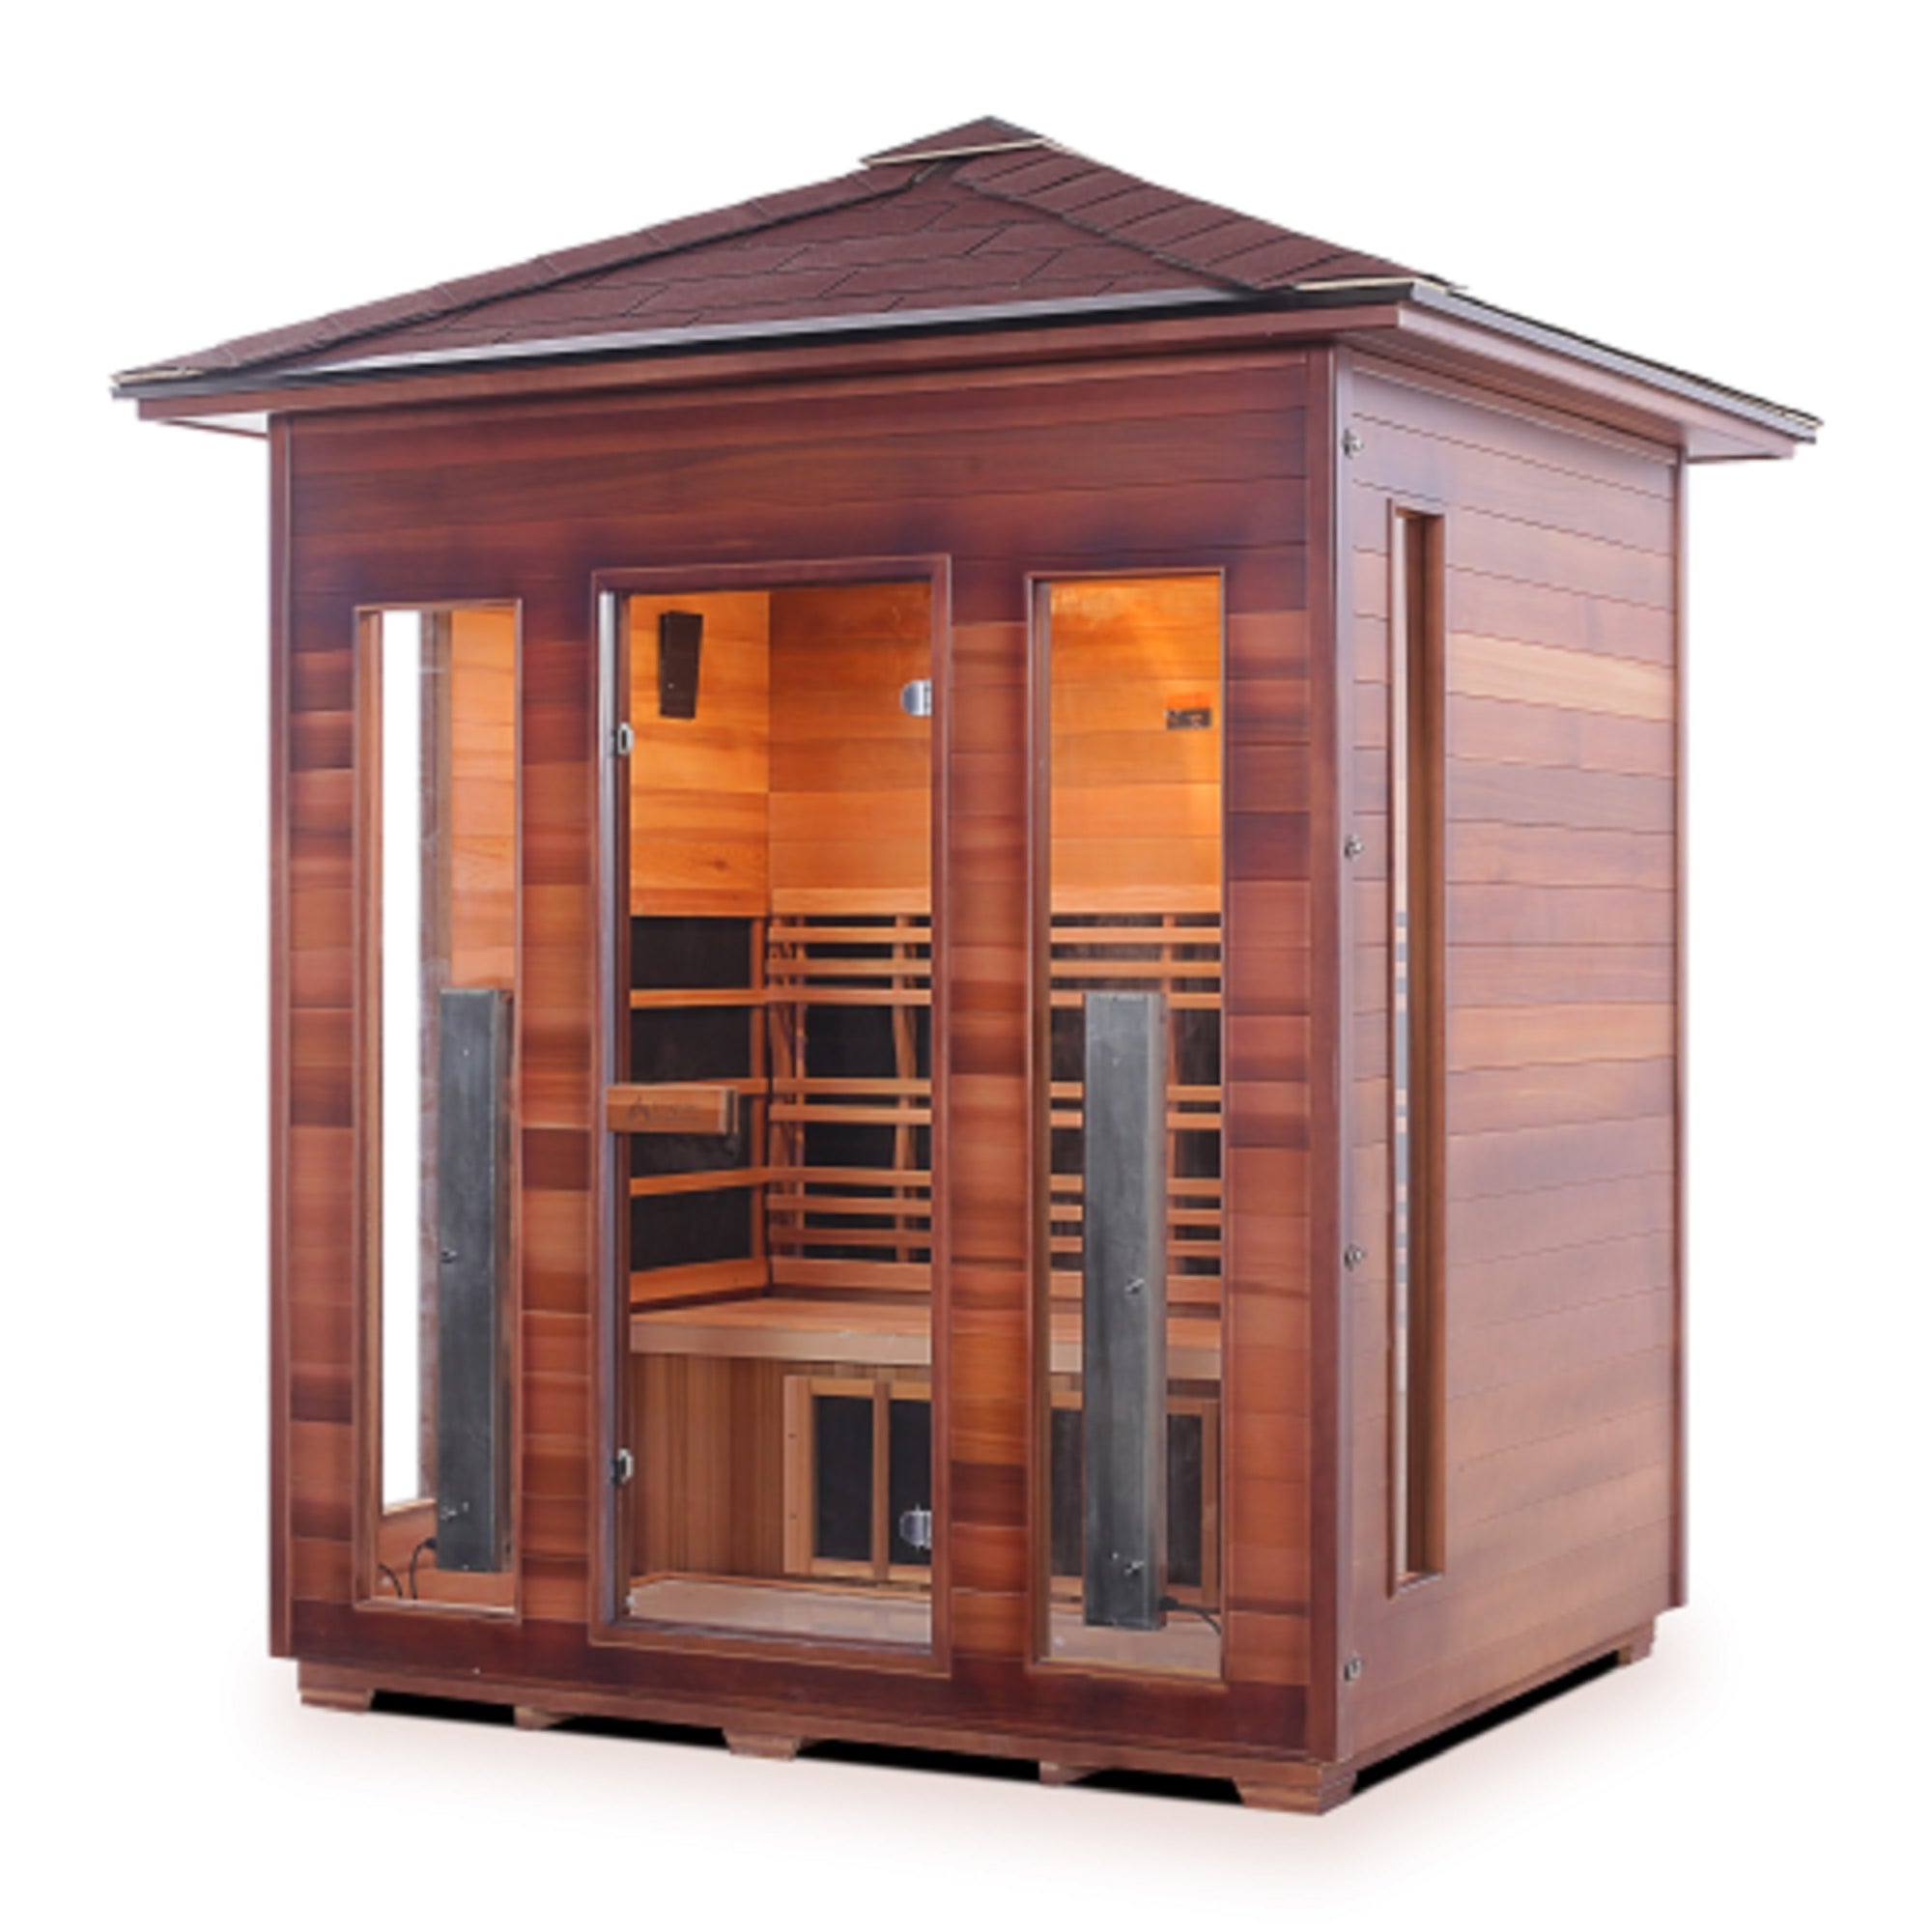 Enlighten sauna Infrared and Dry Traditional Hybrid Diamond 4 Person Outdoor Canadian natural red cedar wood Double Roof ( Flat Roof + peak roof) with glass door and windows front view